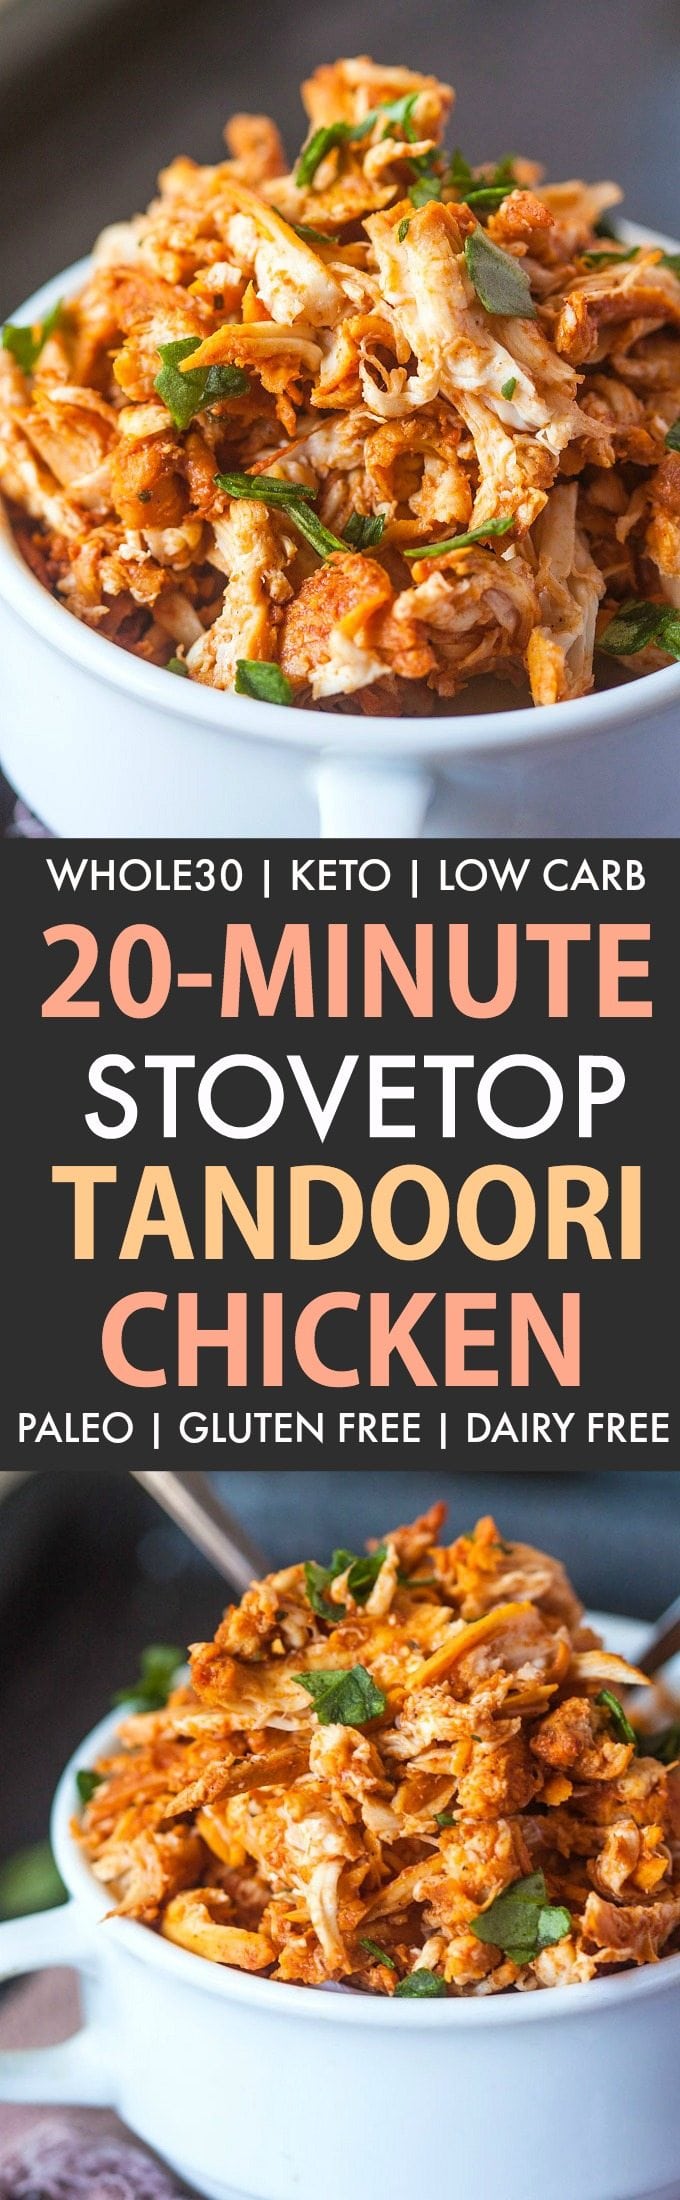 20 Minute Stovetop Pulled Tandoori Chicken (Whole30, Keto, Paleo, Gluten Free)- Easy low carb chicken recipe which is whole30 approved and keto friendly- Instant pot and crockpot ready too! #instantpot #whole30 #keto #whole30approved | Recipe on thebigmansworld.com